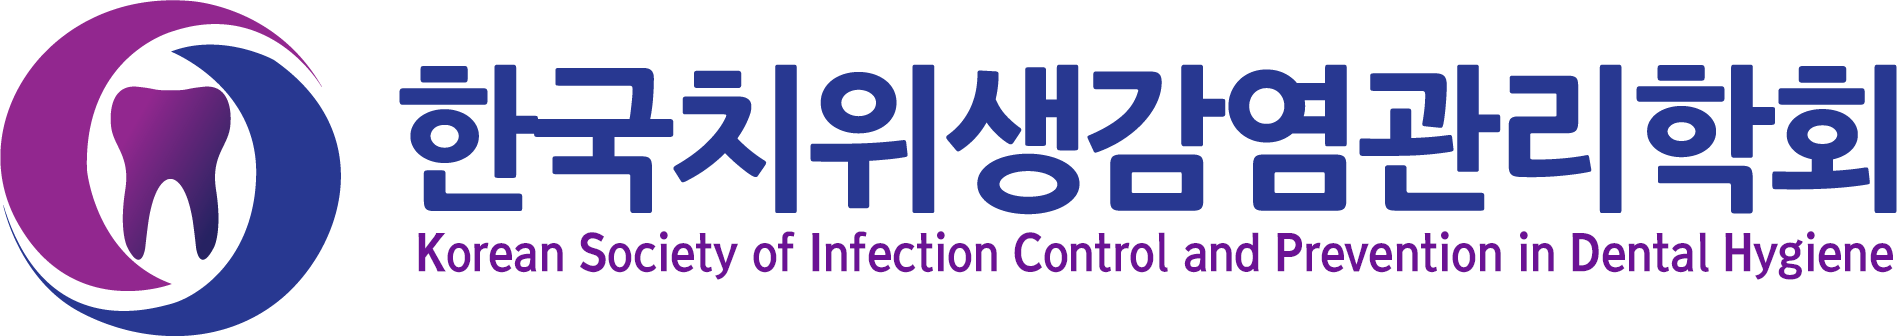 Korean Society of Infection Control and Prevention in Dental Hygiene